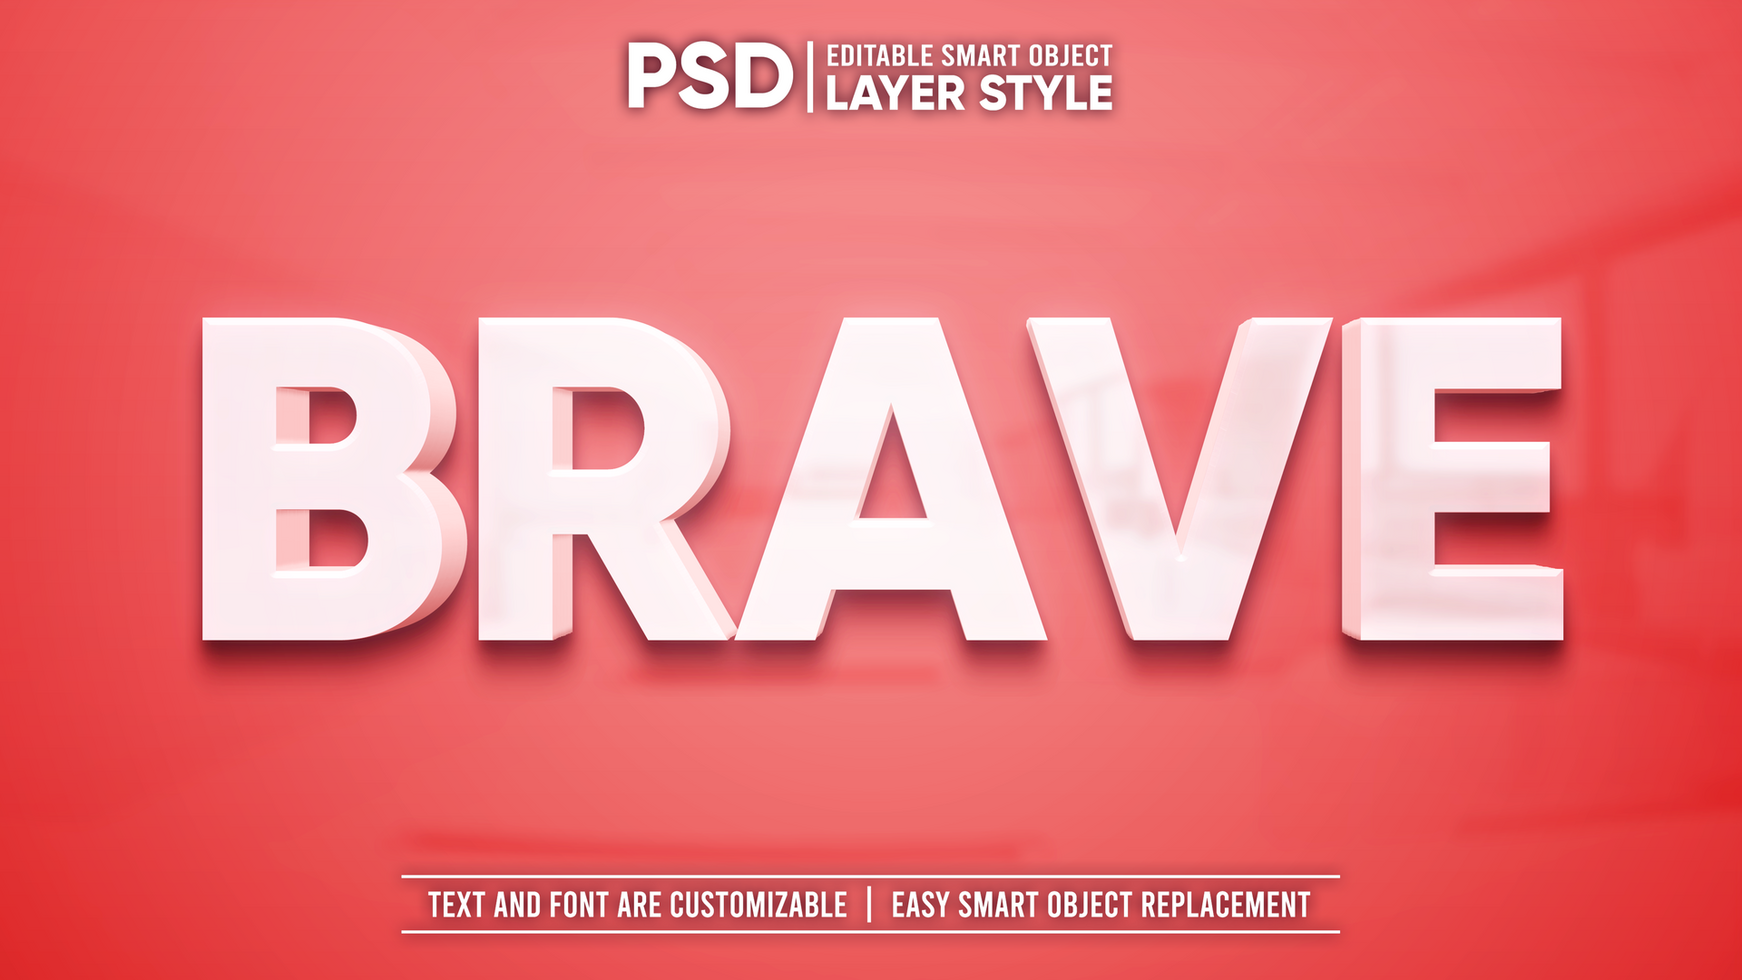 Clean White Text with Reflection on Red Granite 3D Editable Smart Object Layer Style Text Effect psd